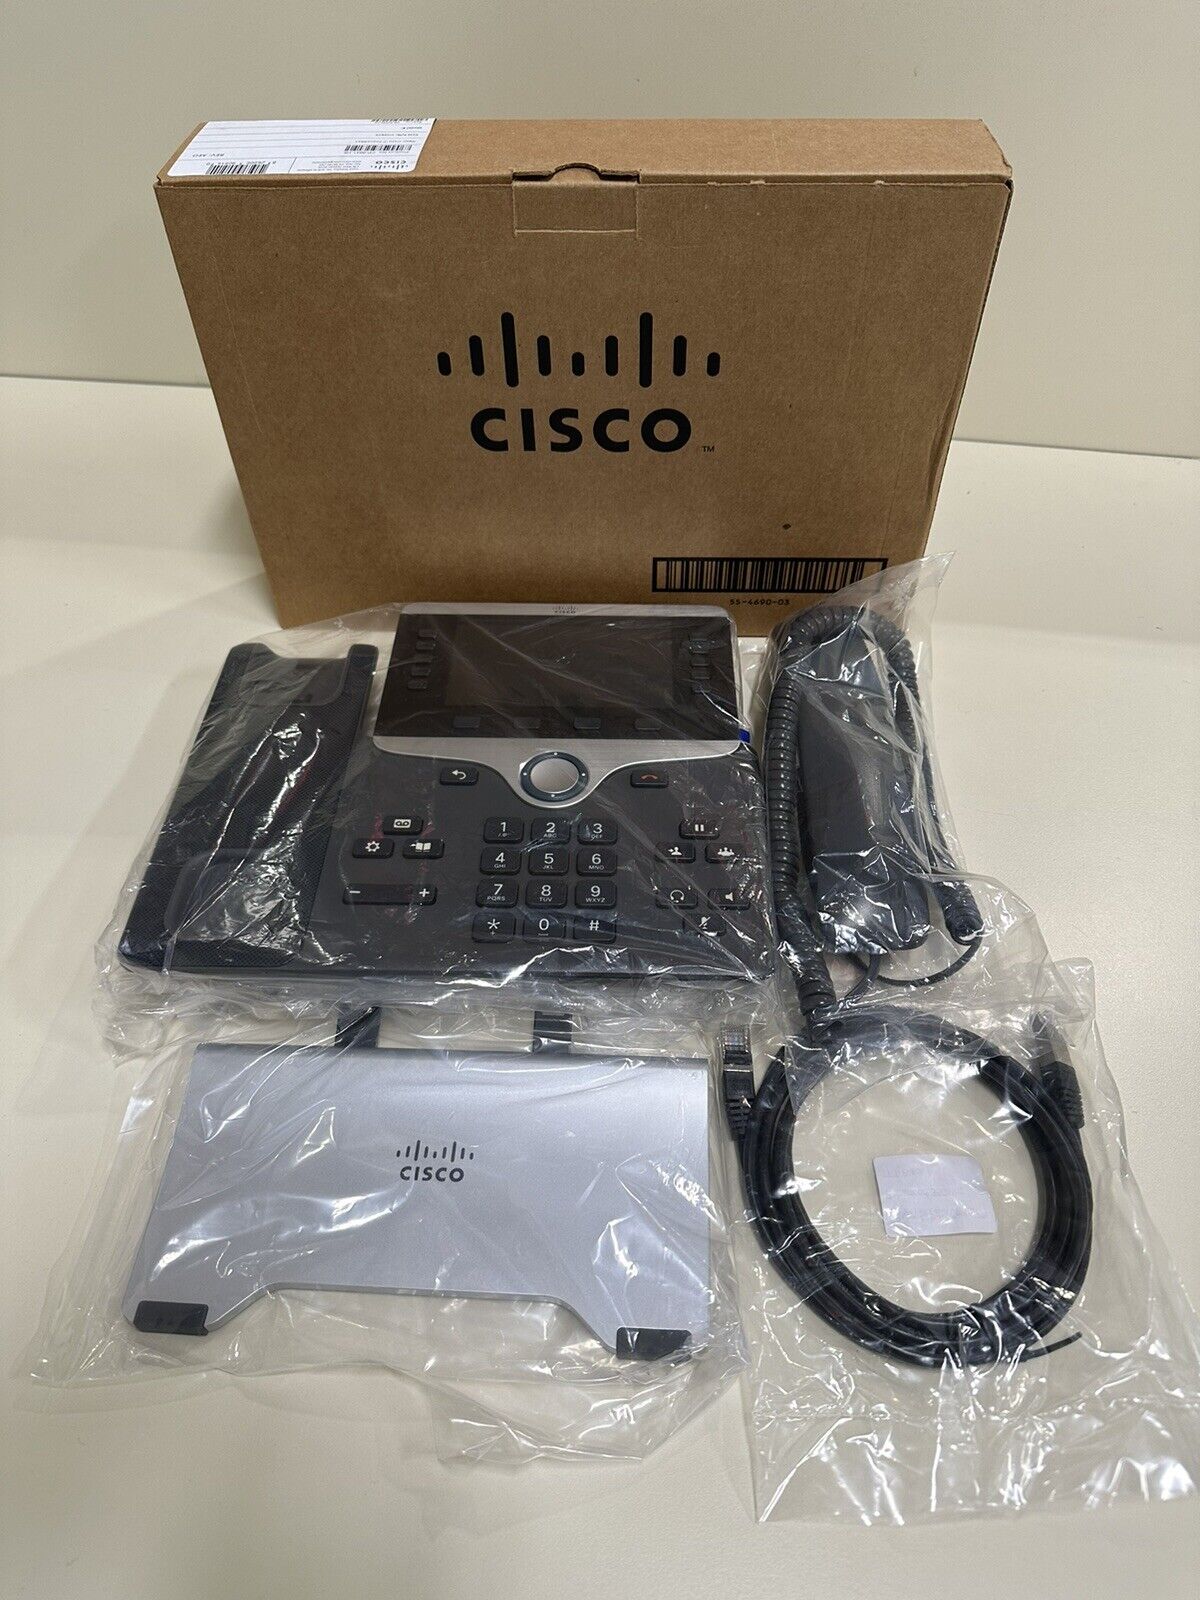 Cisco 8841 CP-8841-K9 VoIP Business IP Phone (Charcoal)